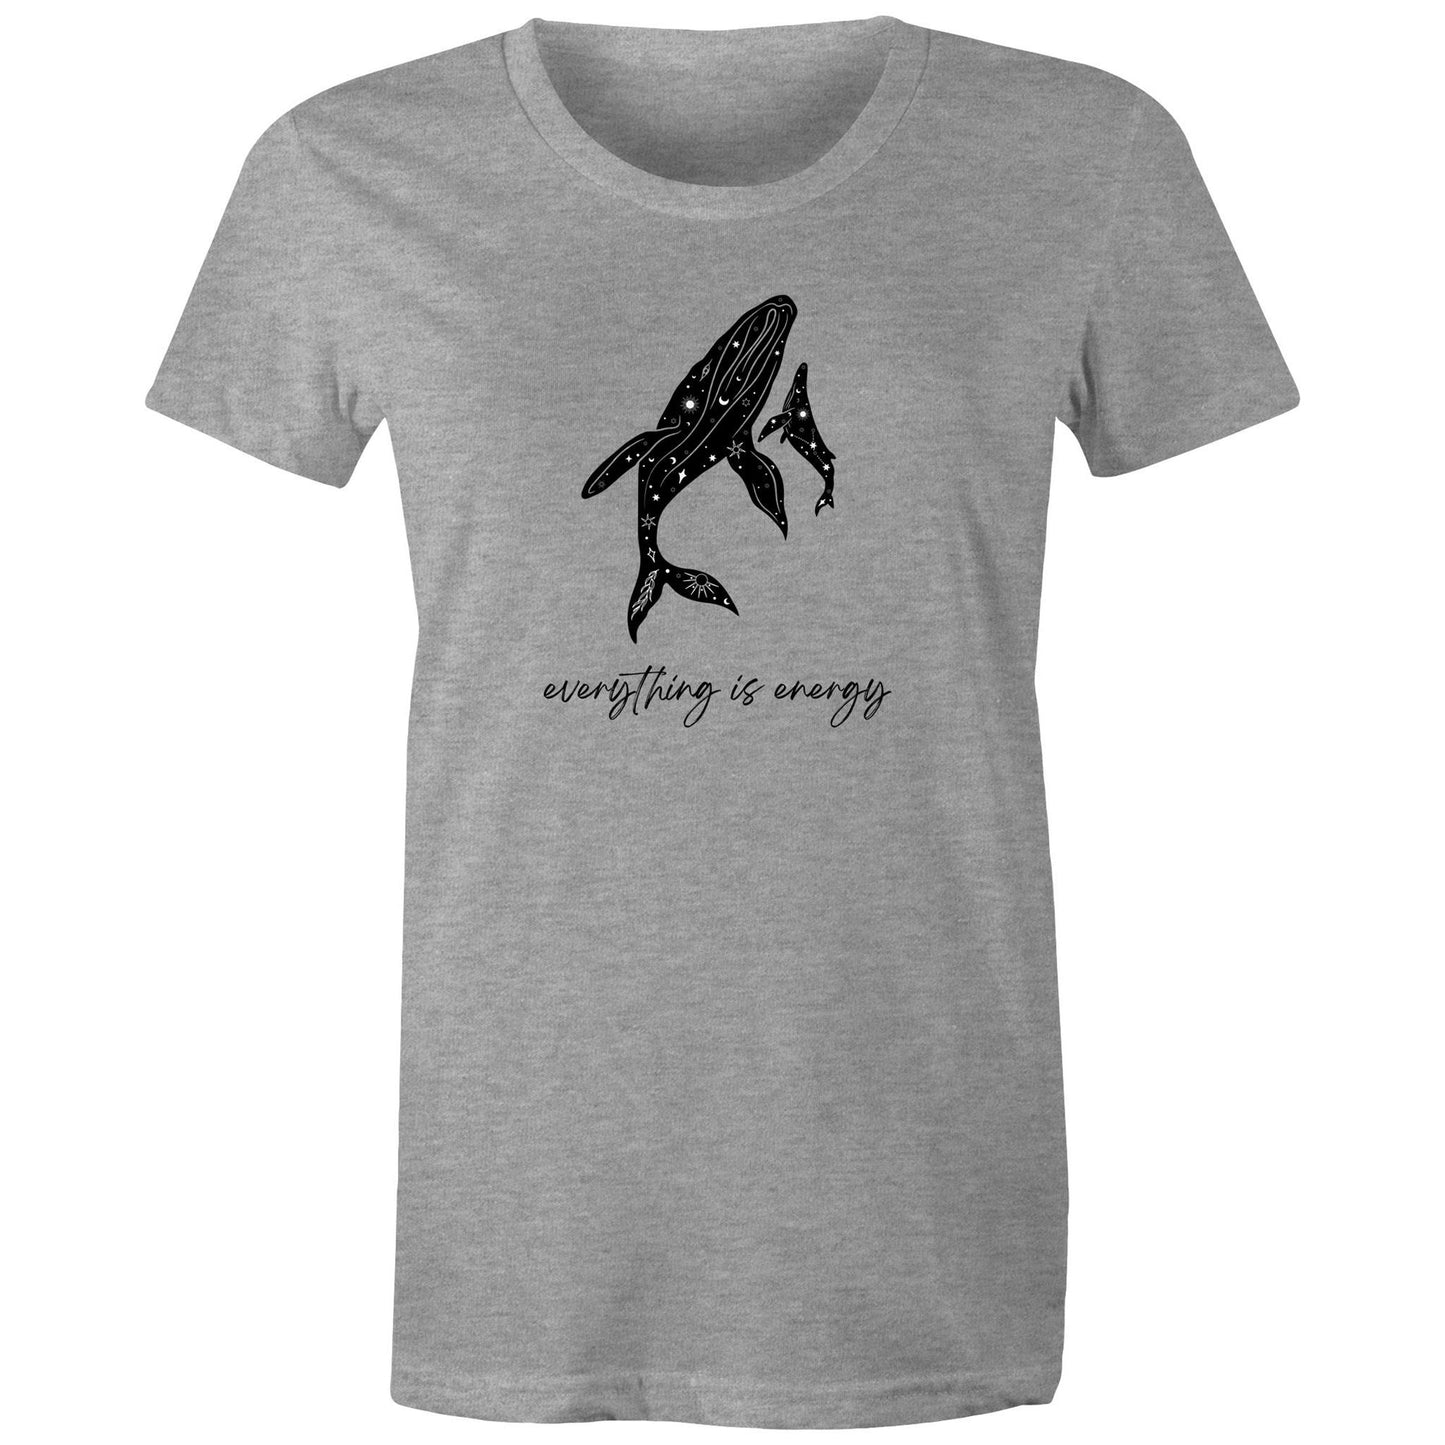 Current Mood 'EVERYTHING IS ENERGY' Women's Tee